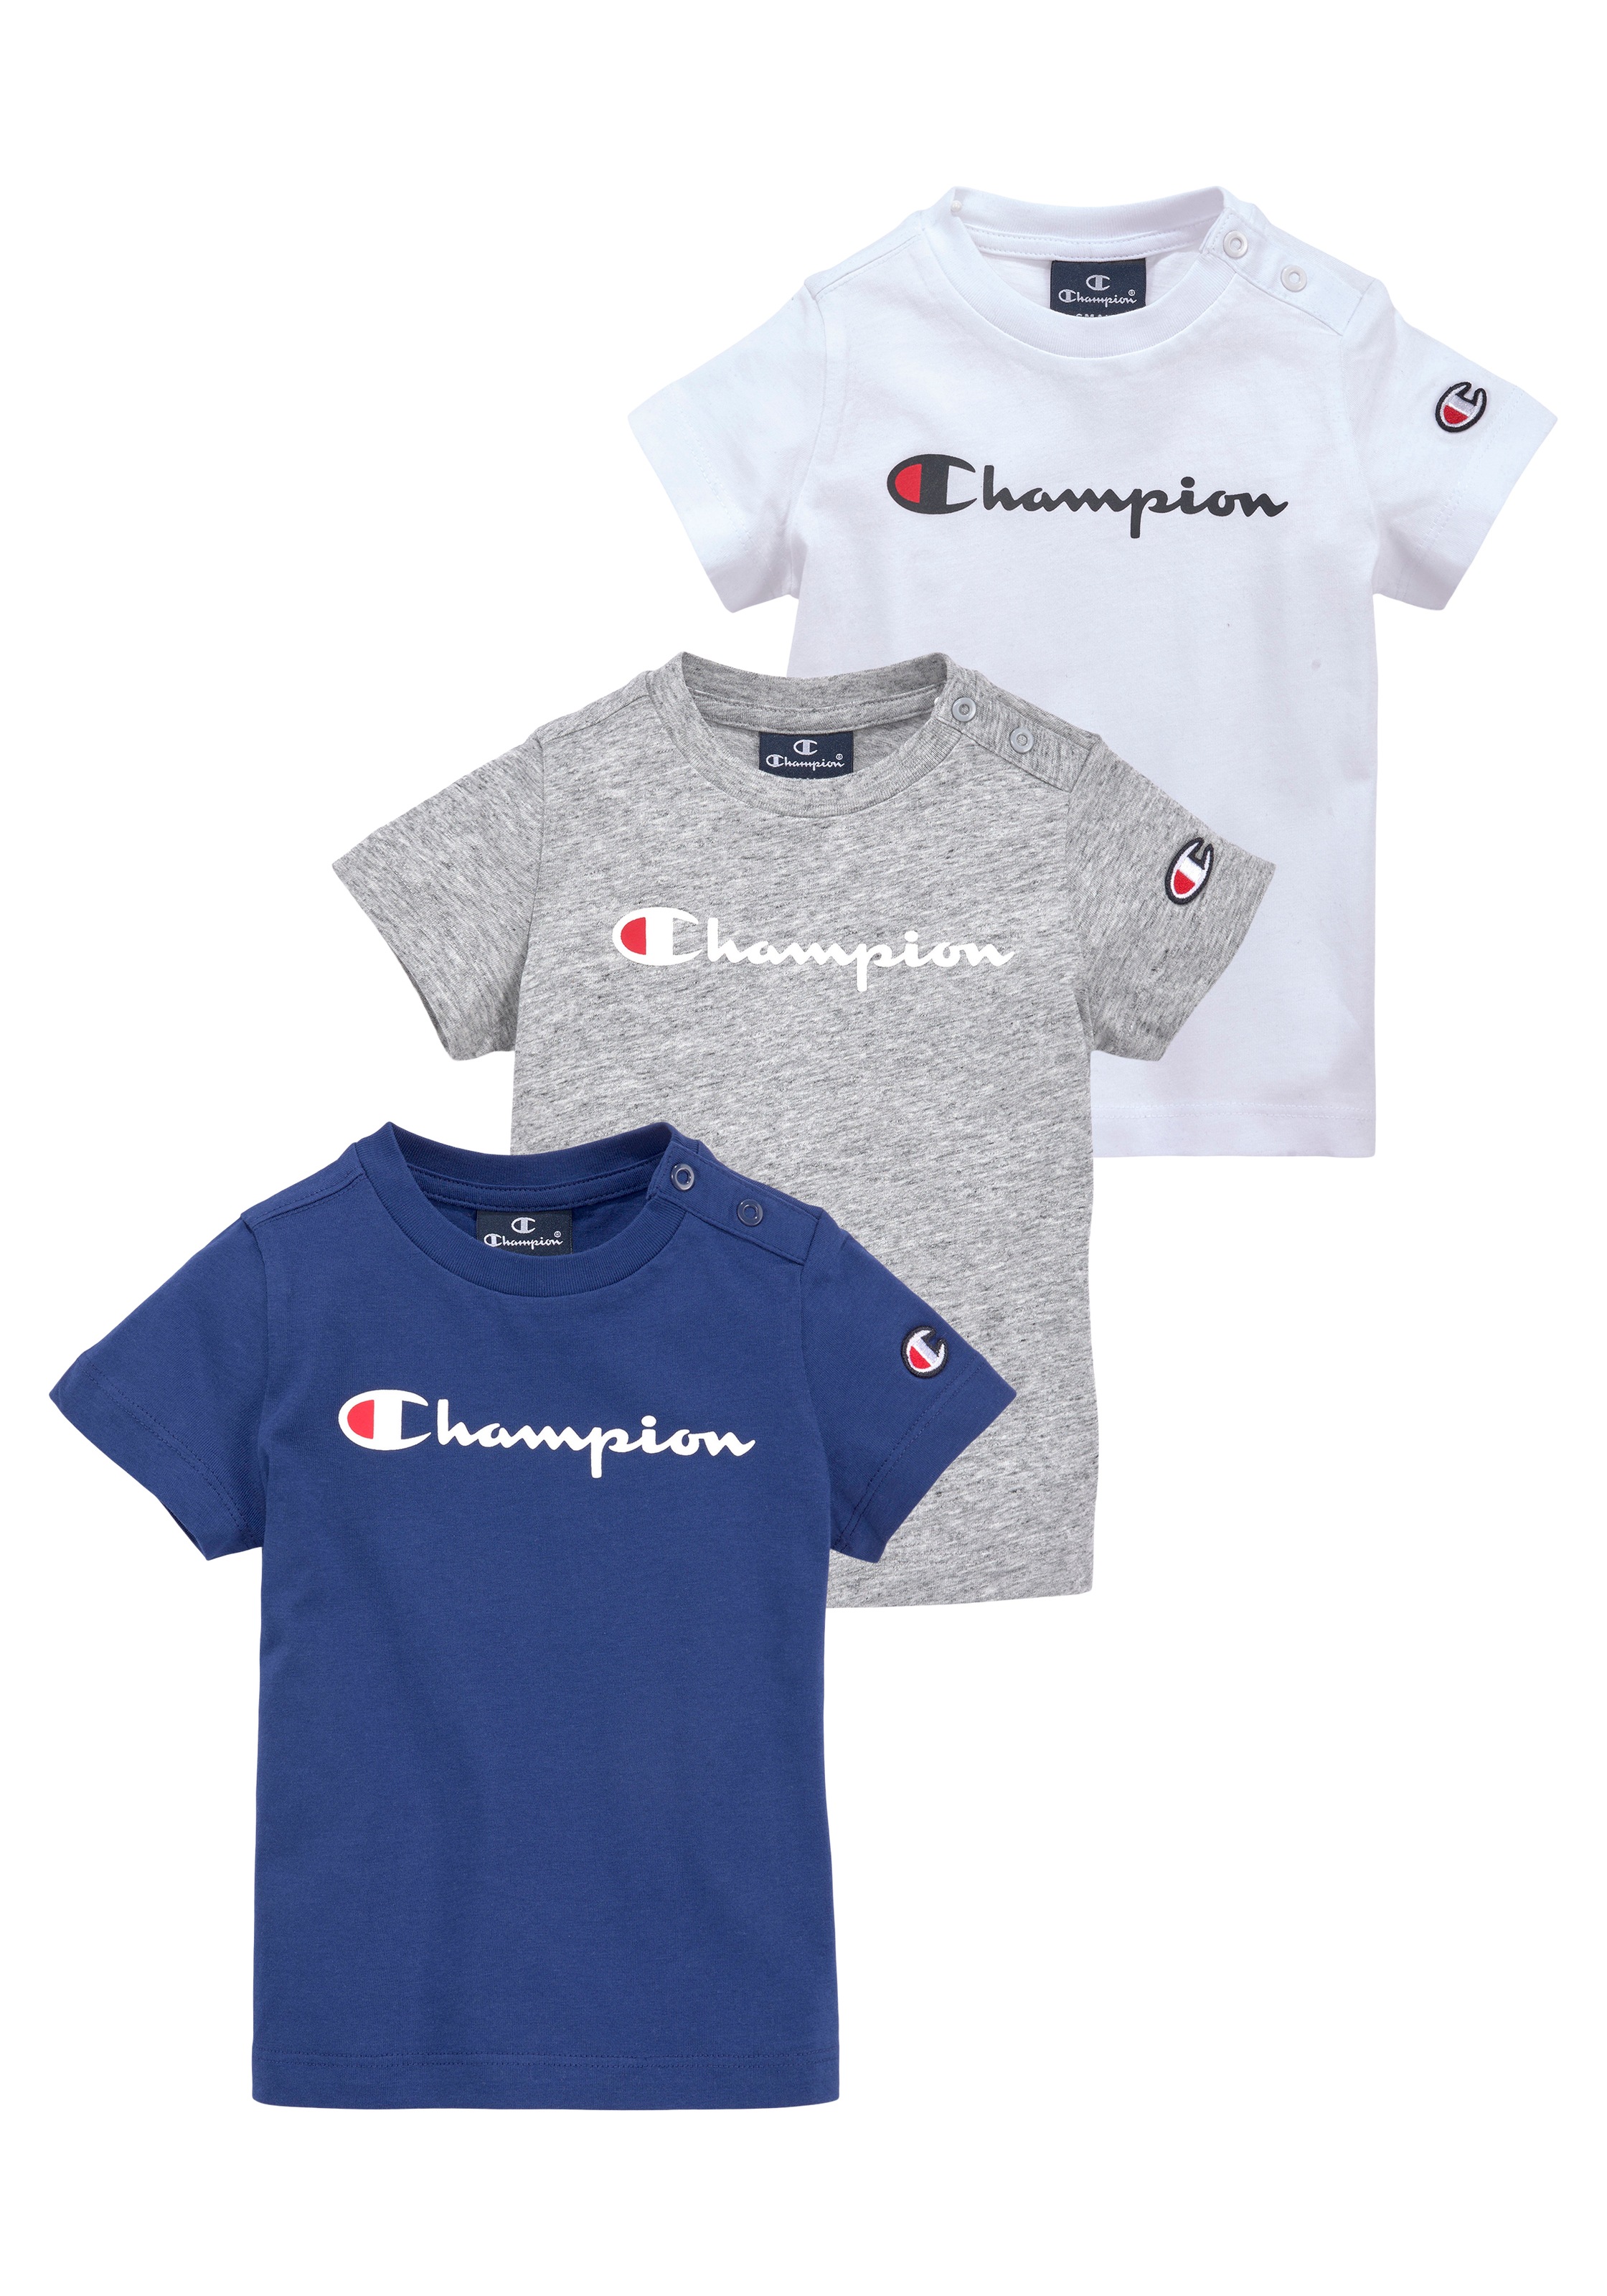 pack Classic 3 3 T-Shirt »Toddler bei tlg.) (Packung, T-Shirt«, Champion